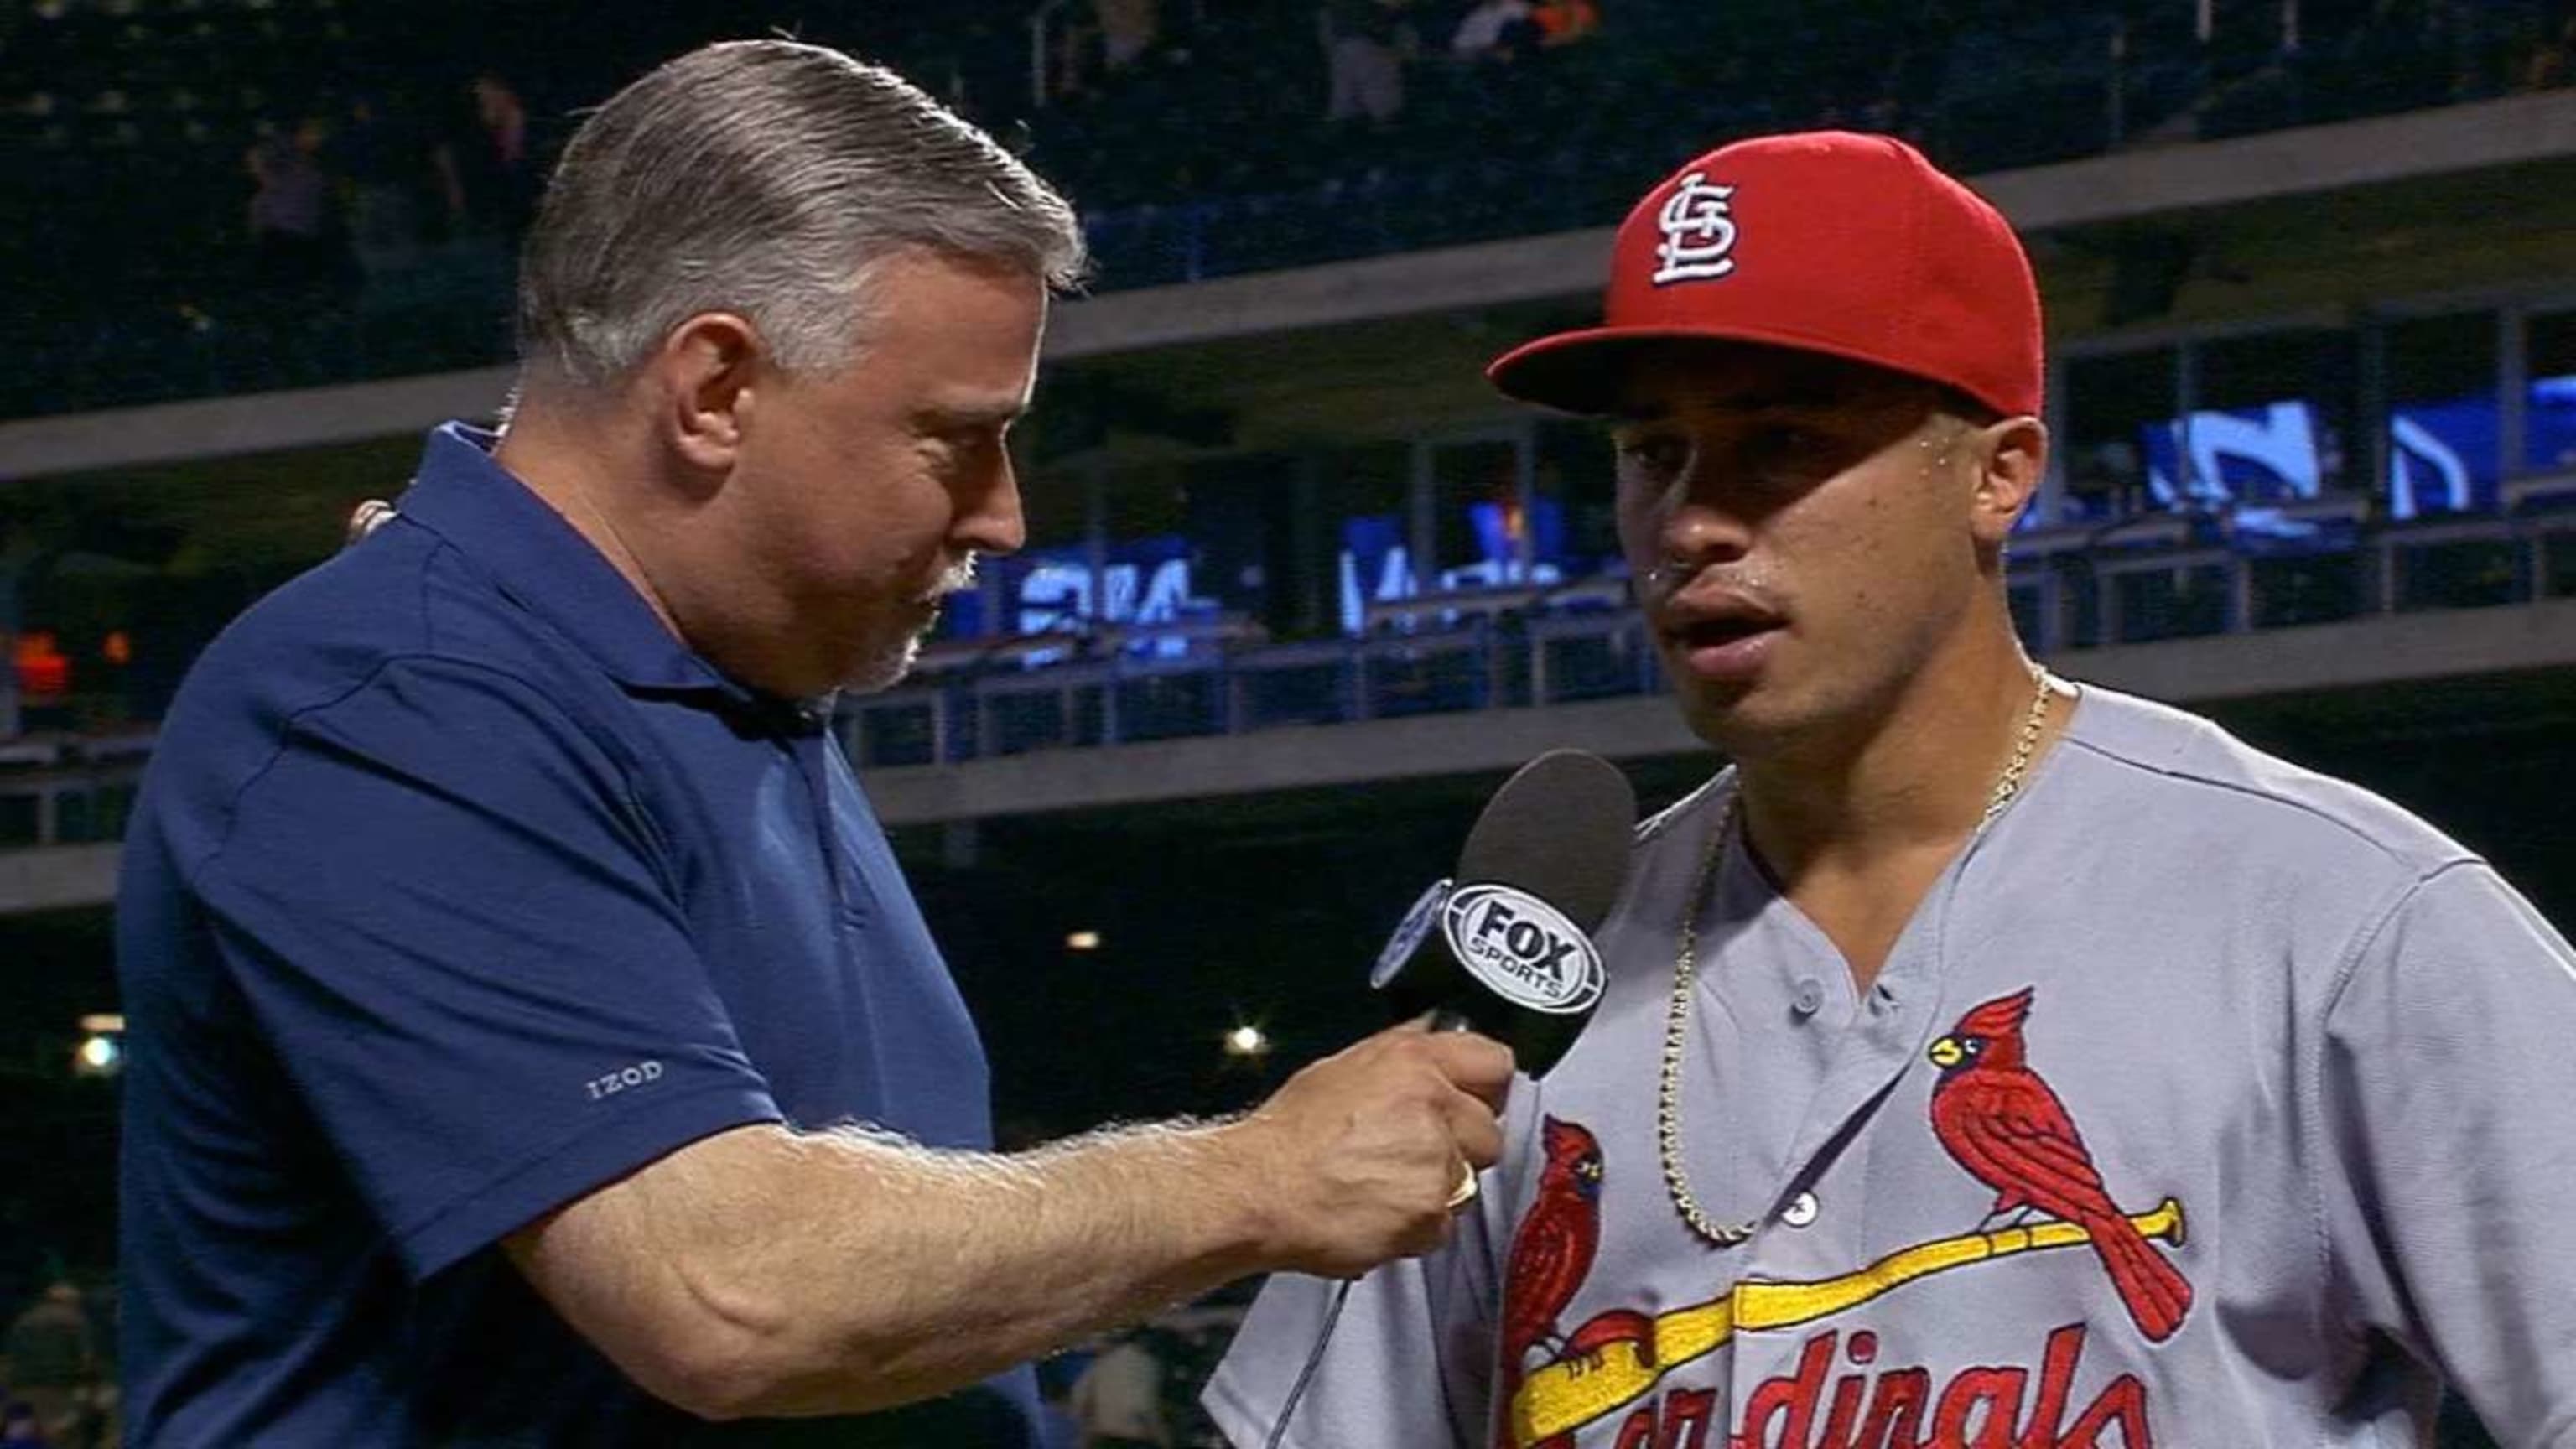 MLB Network: Yadier Molina hearing from Mets, Yankees, others